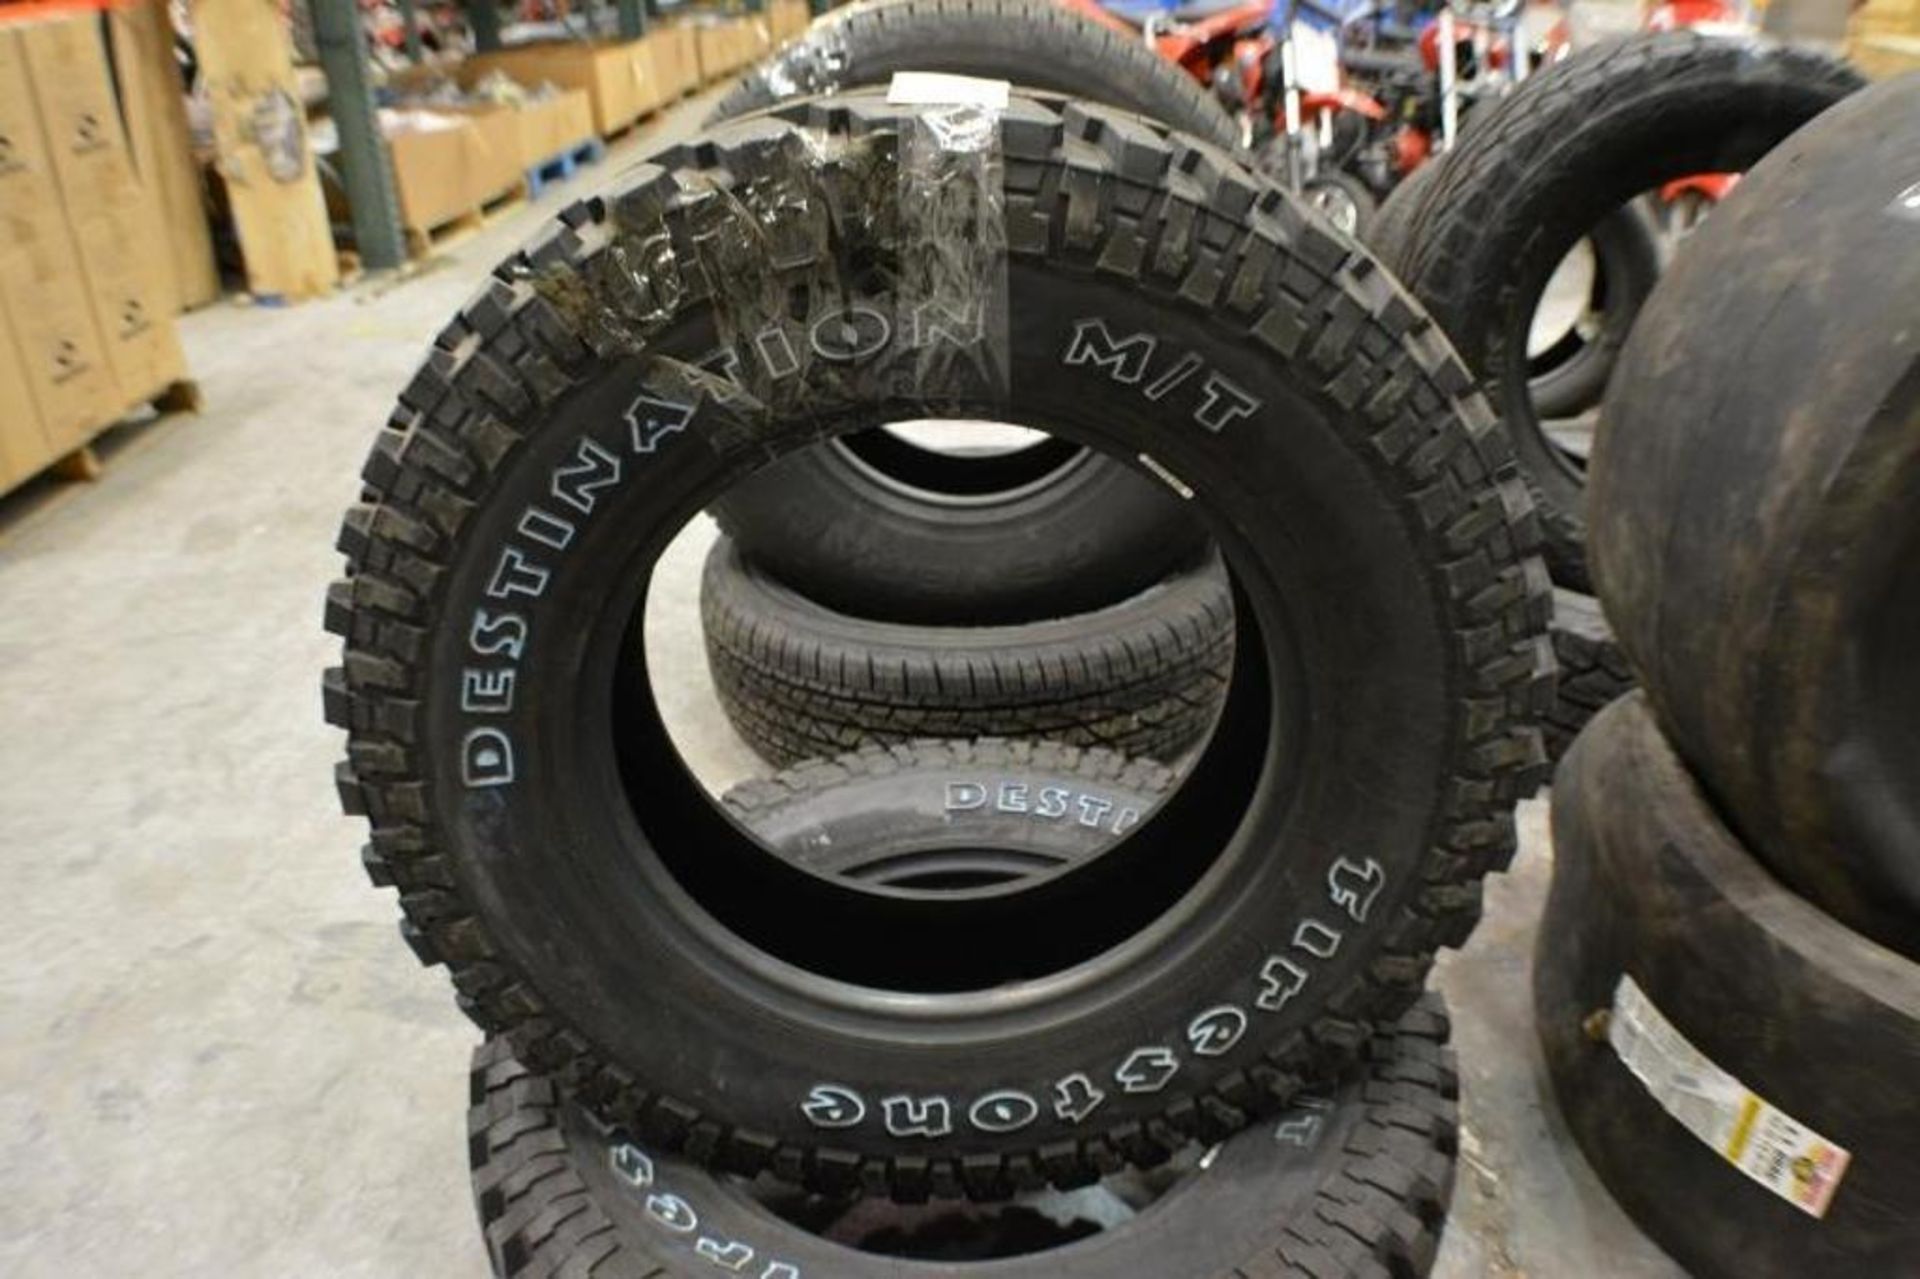 Tires. Set of 2 Tires LT 275 70R18 M + S by Firestone - Image 2 of 5